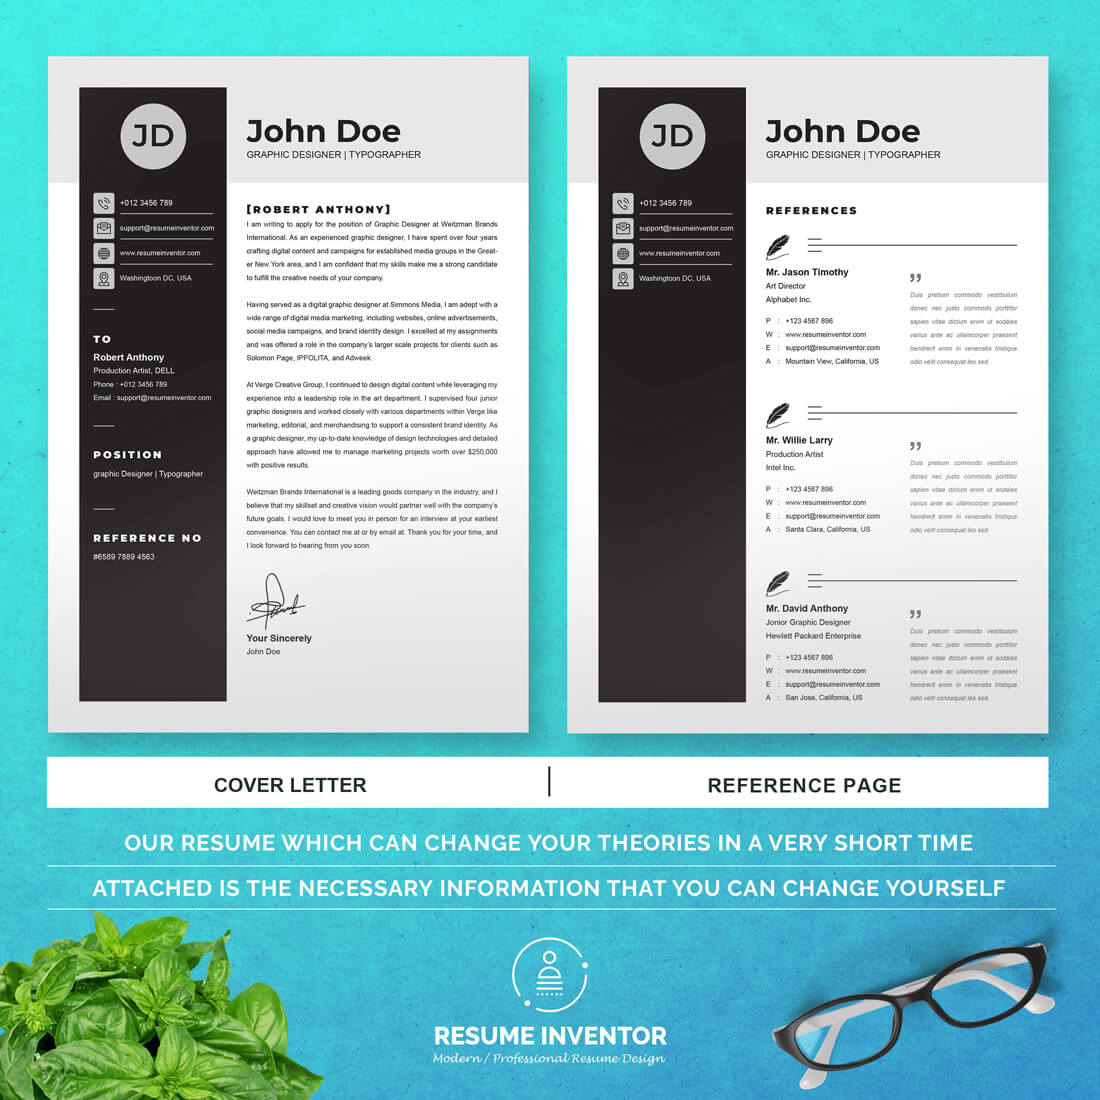 Clean and modern resume template with a blue background.